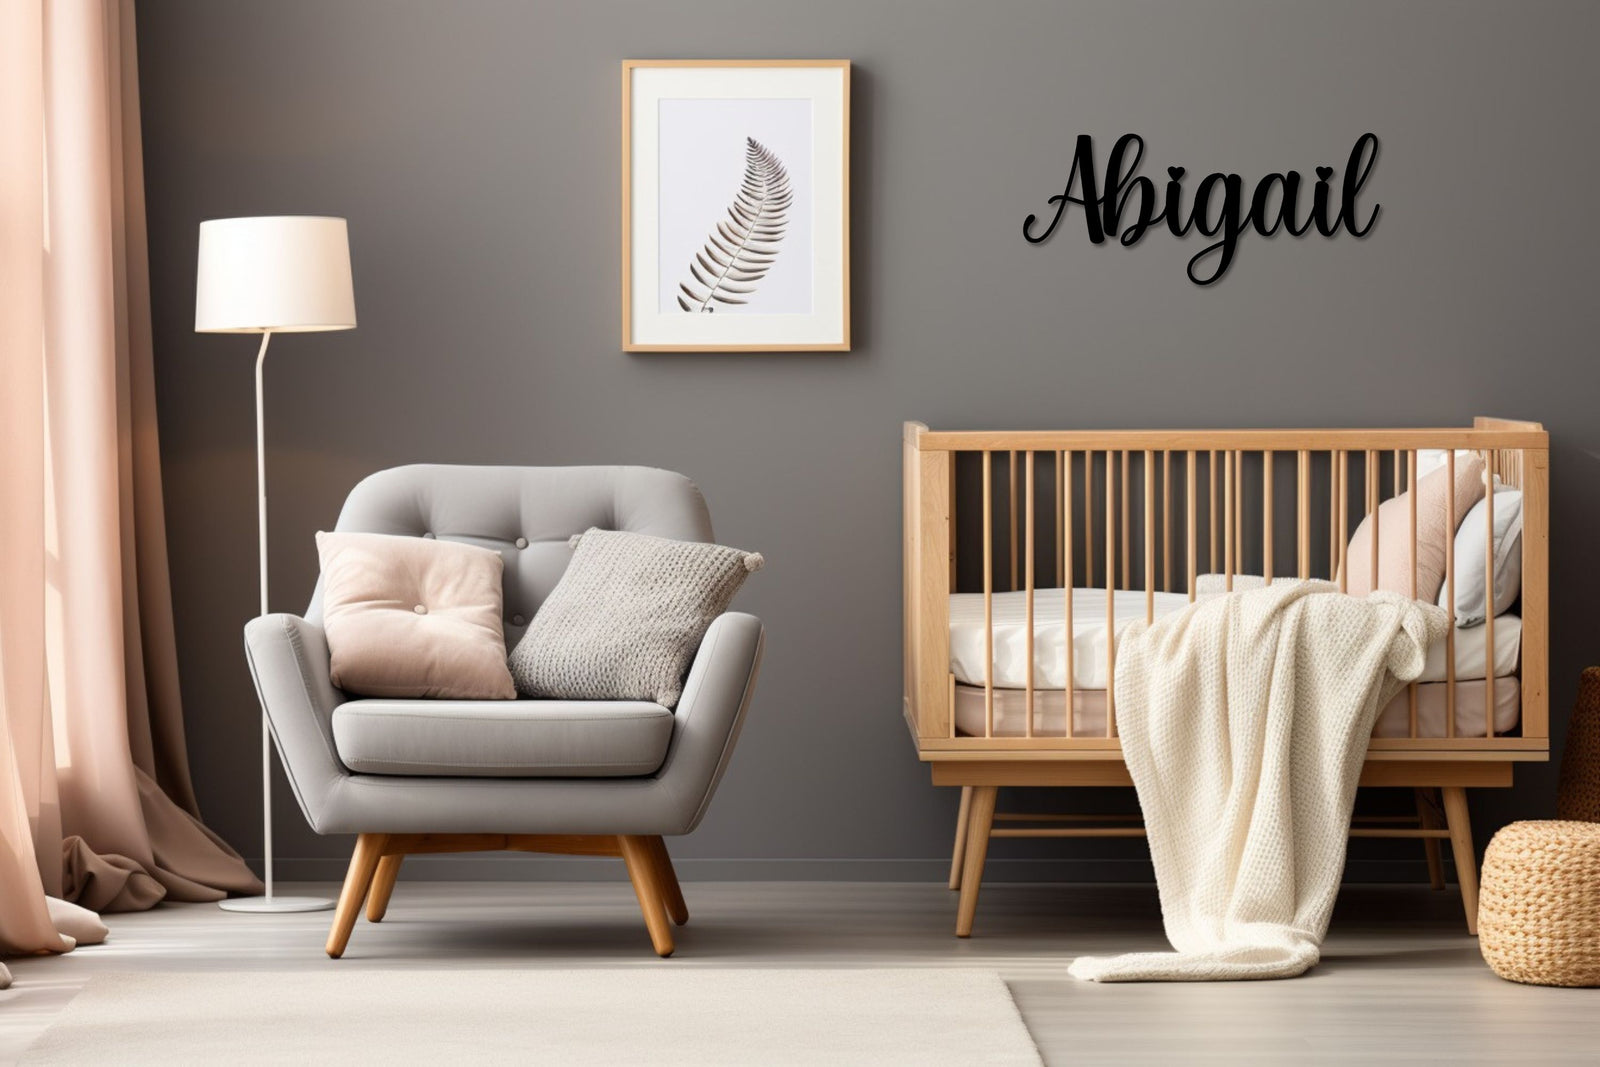 Nursery Decor: Creating a Magical Space for Your Little One